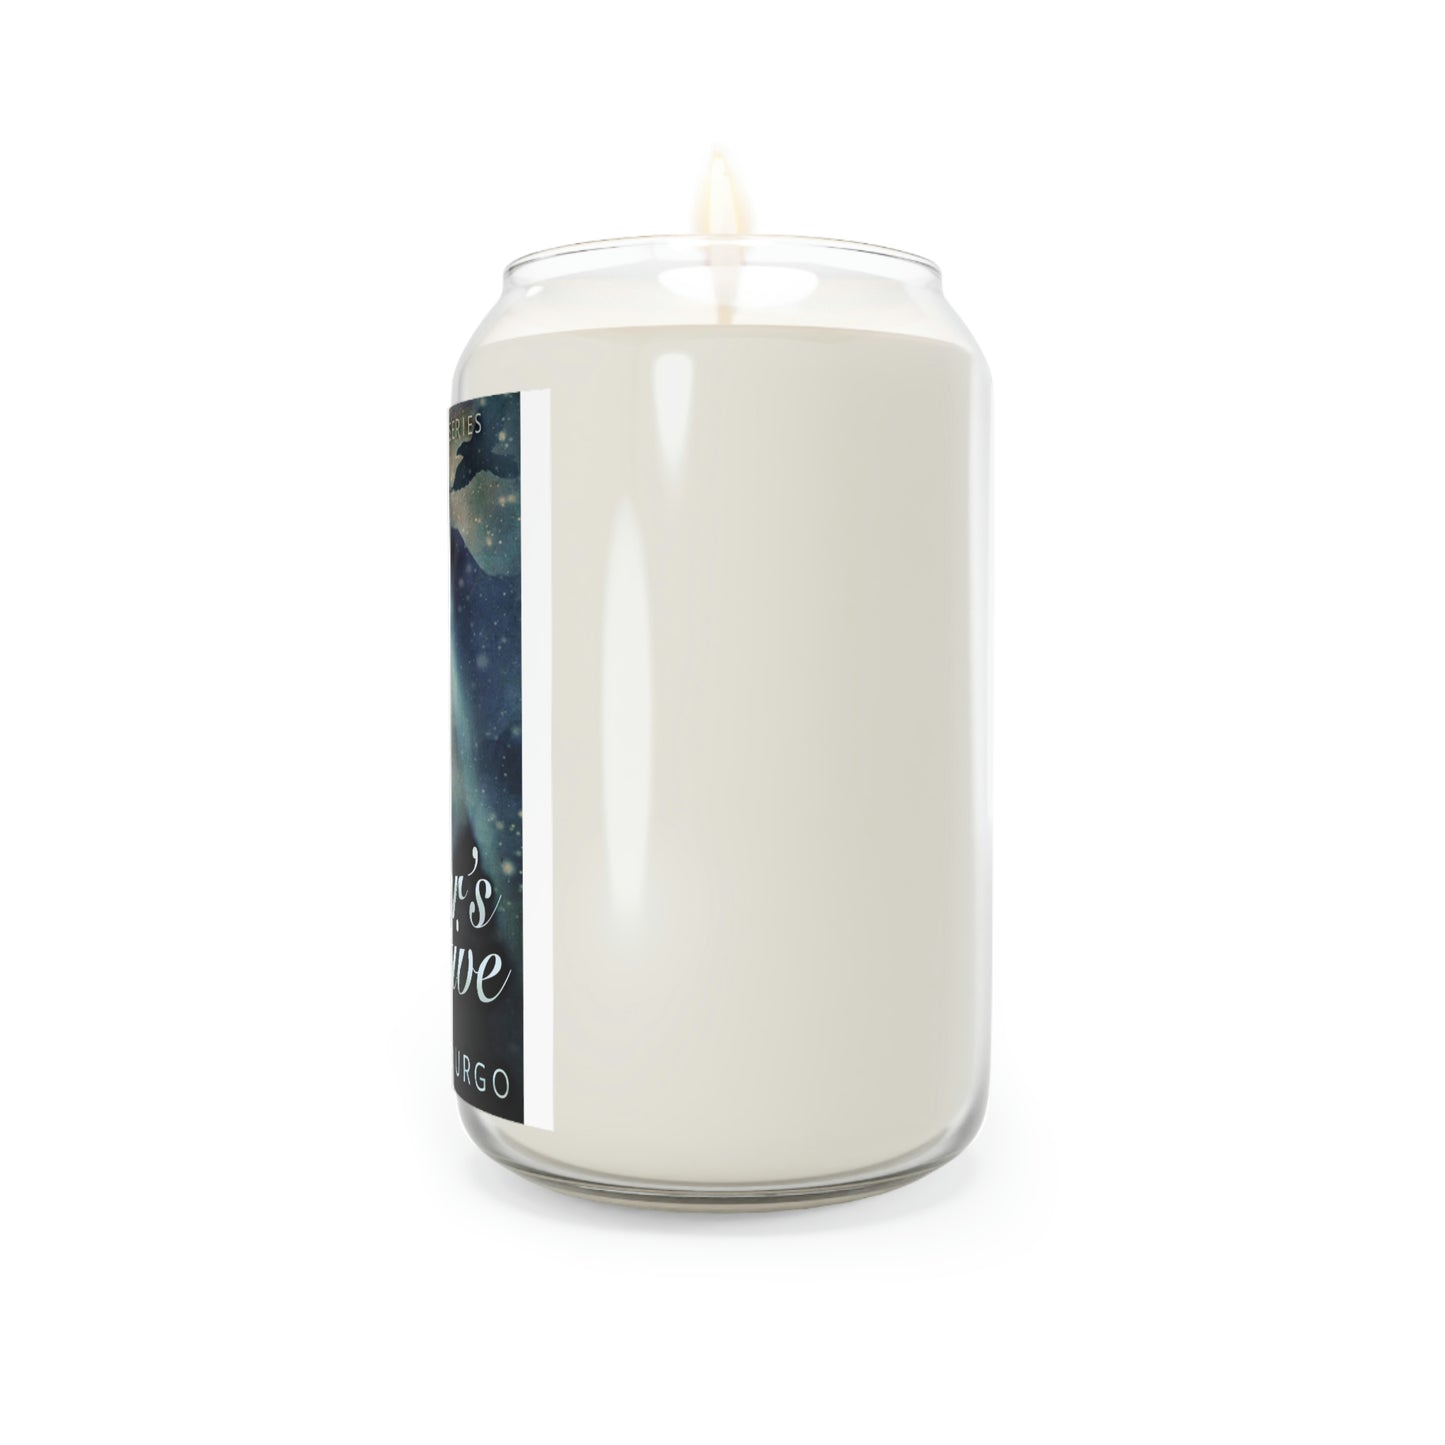 Winter's Captive - Scented Candle